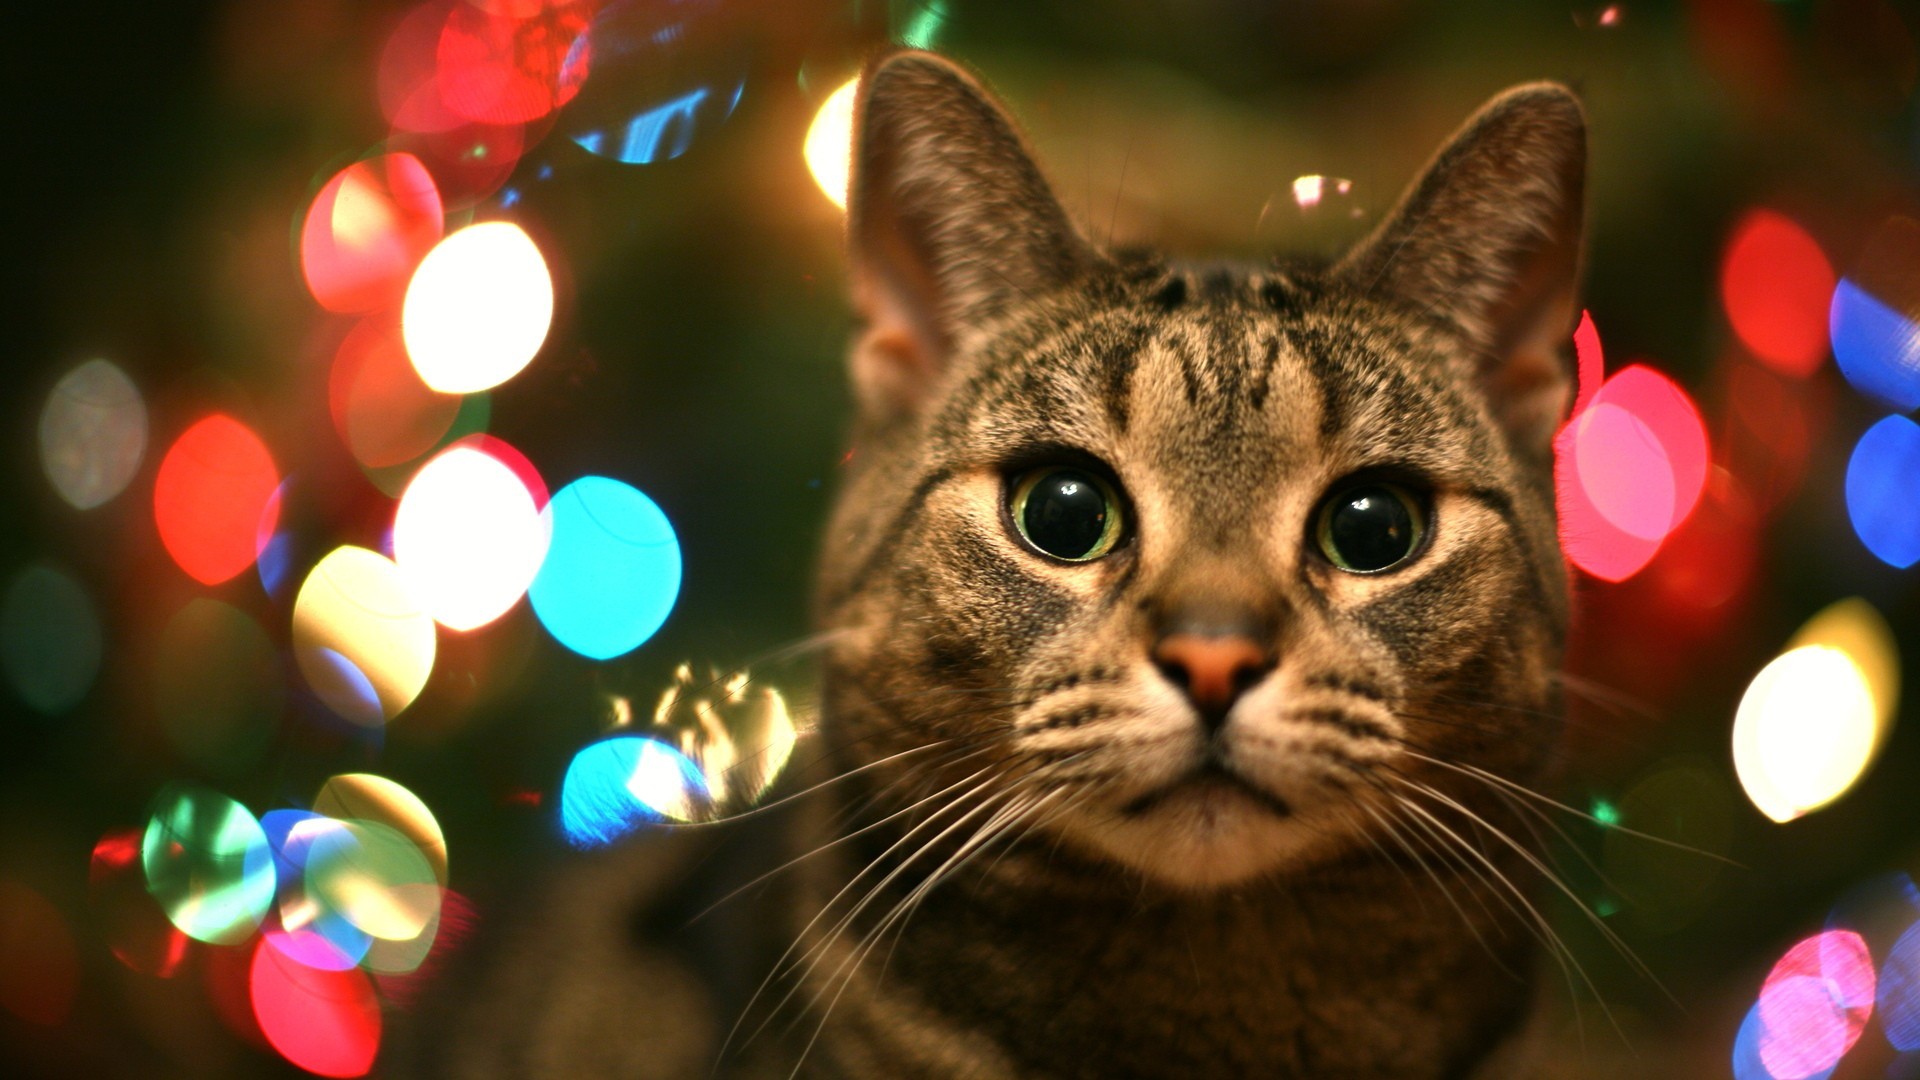 1920x1080 Tabby Cat In Christmas Lights | High Quality Wallpapers,Wallpaper .